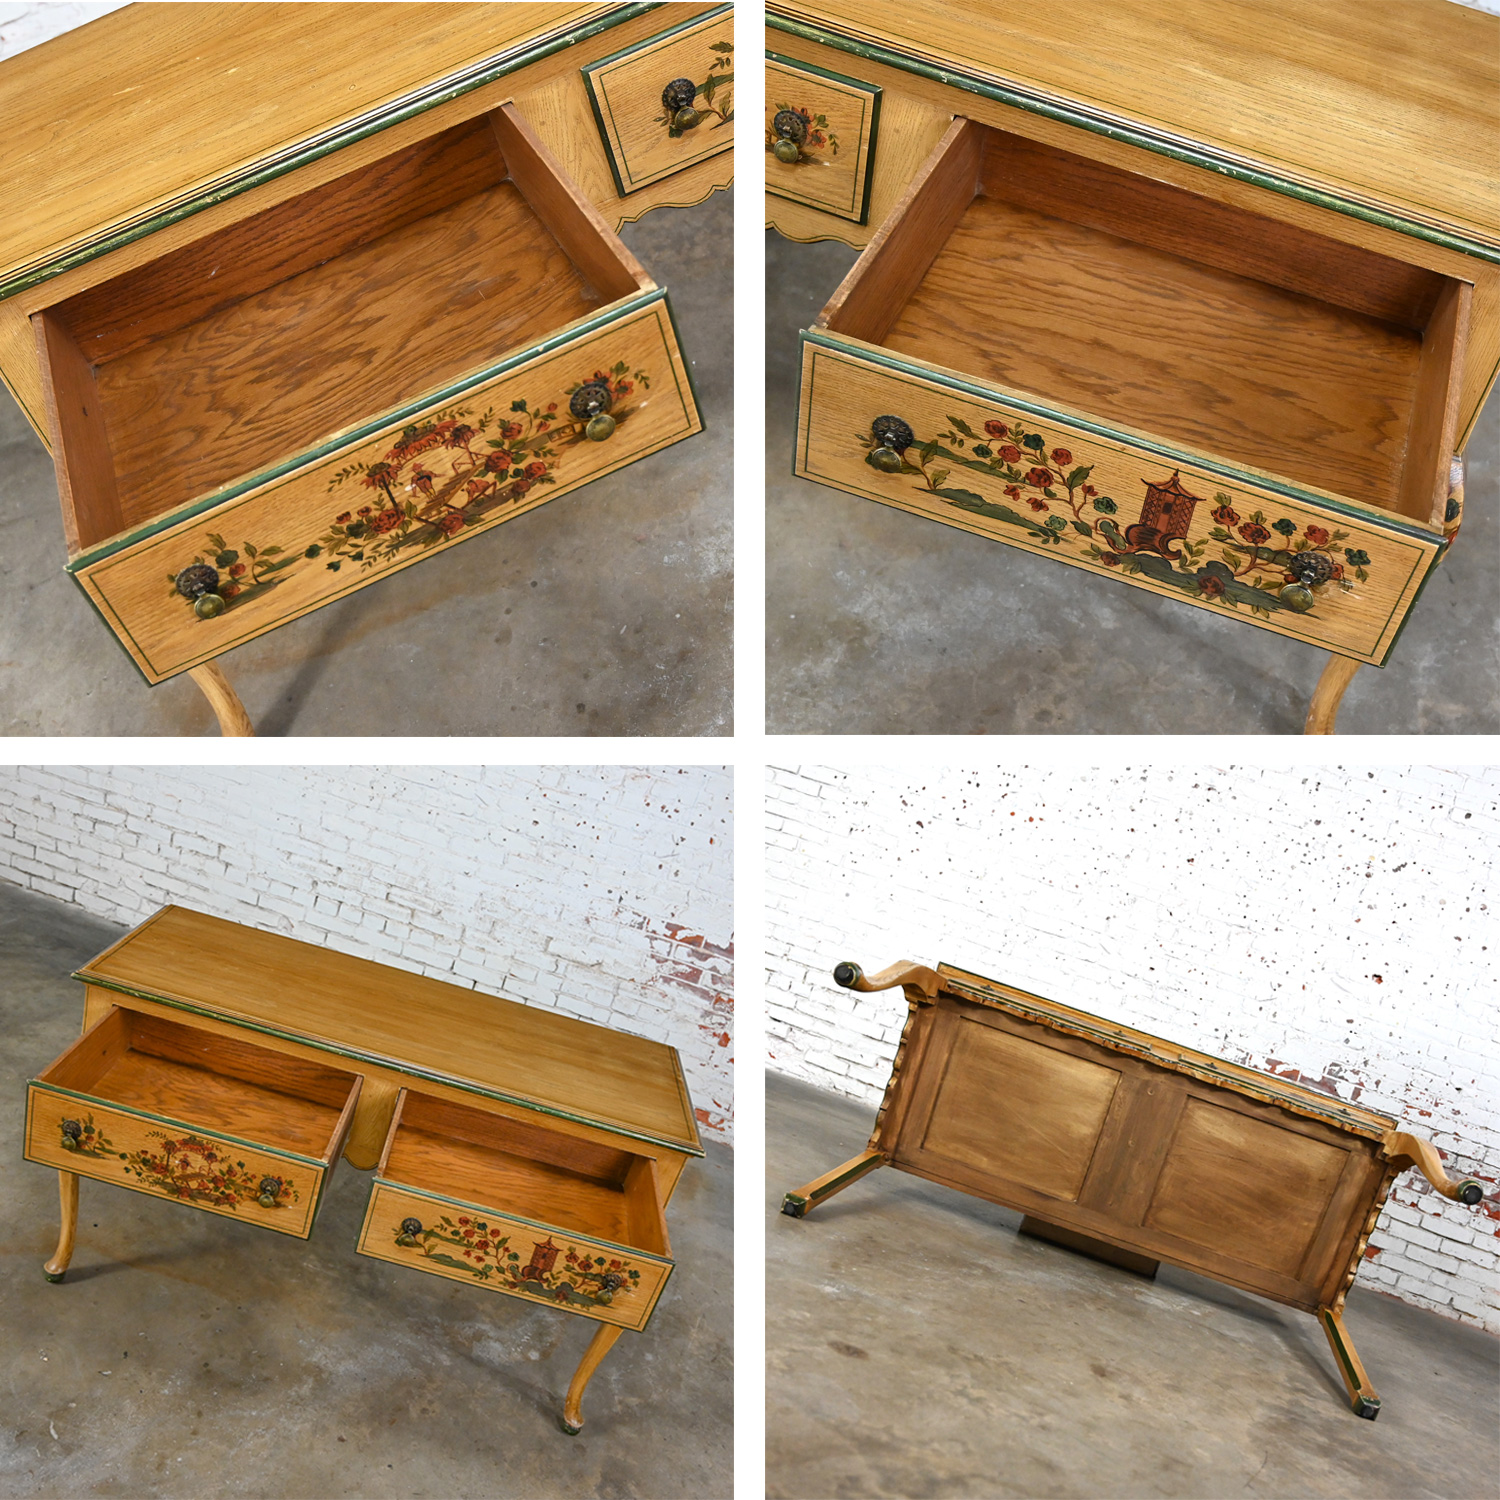 Antique Chinoiserie Hunt Style Buffet Sideboard or Server Hand Painted with Cabriole Legs